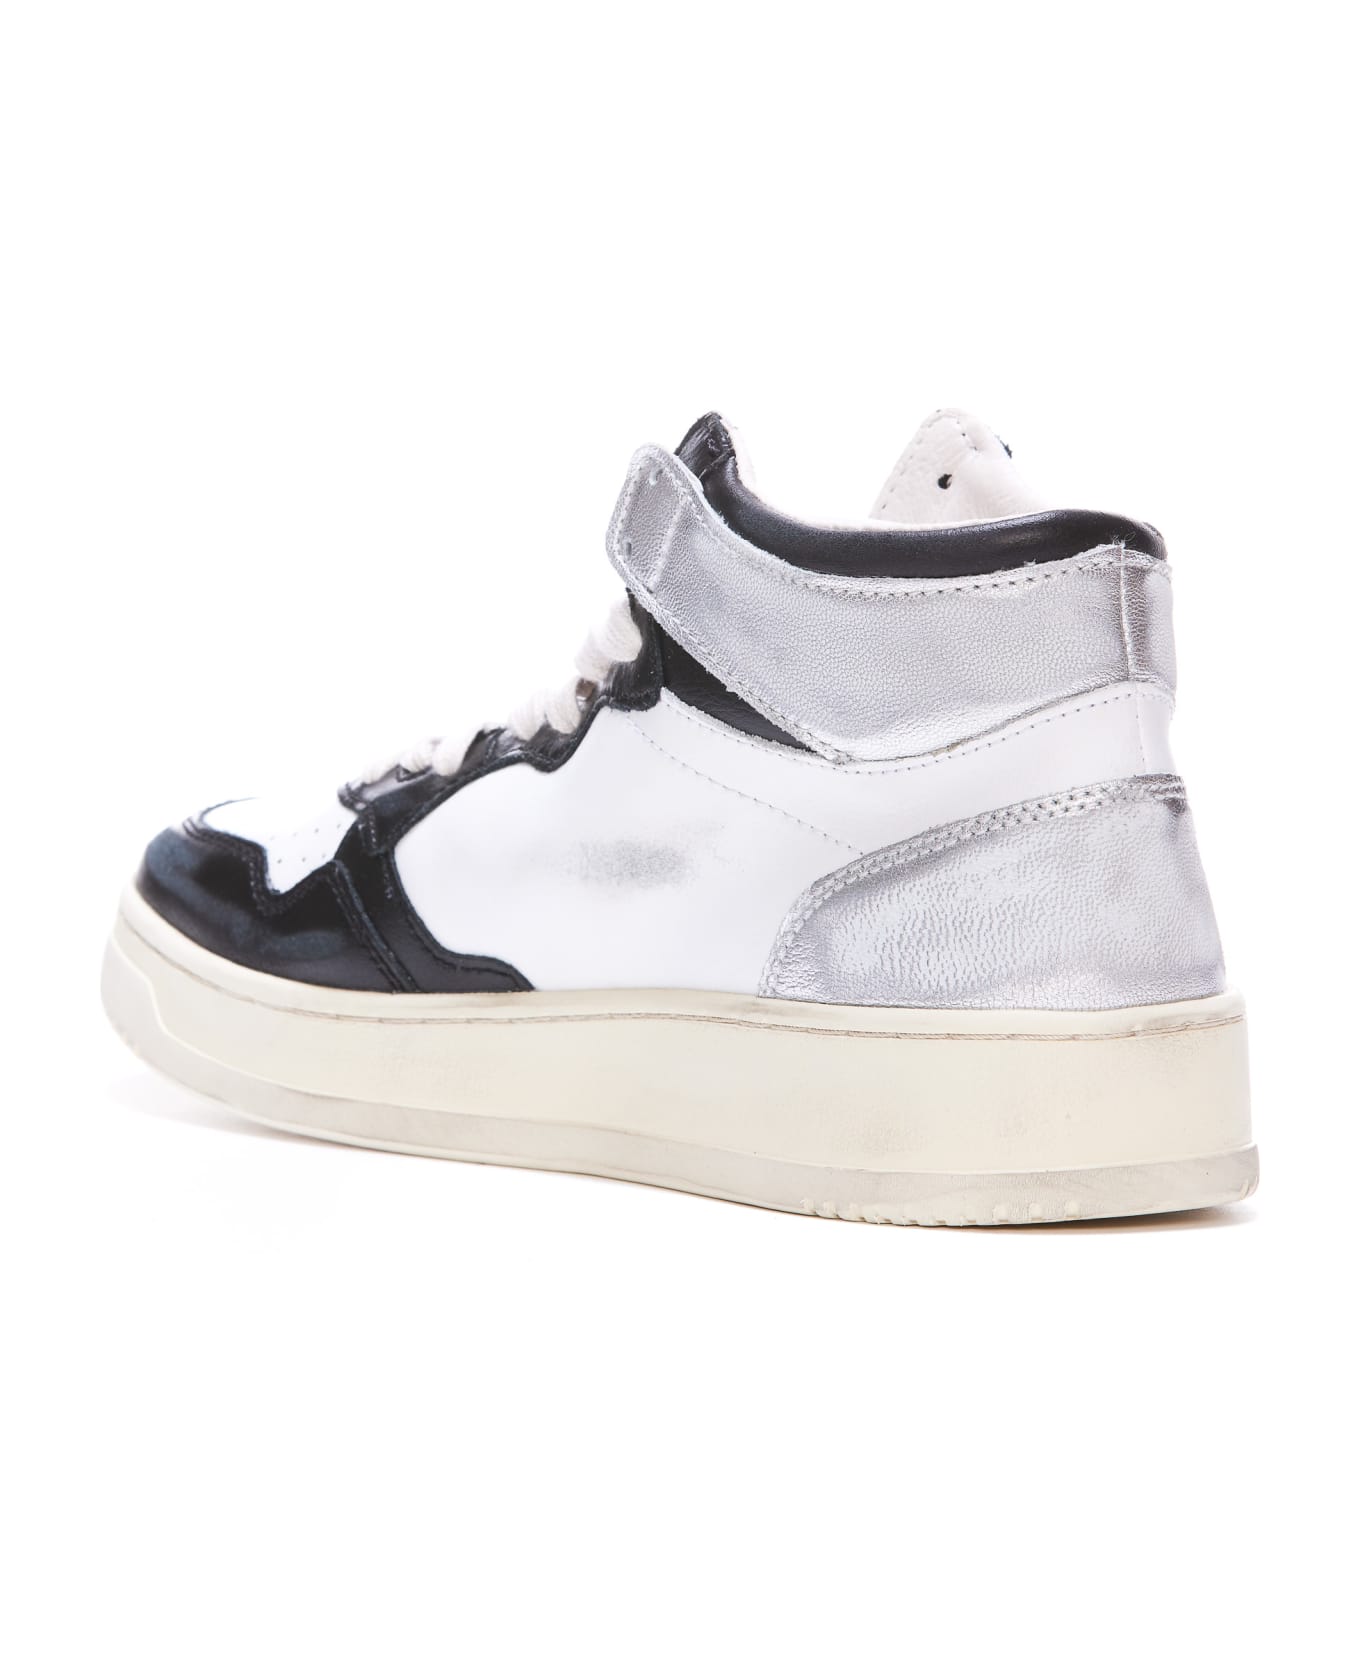 Autry Vintage Medalist Mid Sneakers - White, black, silver